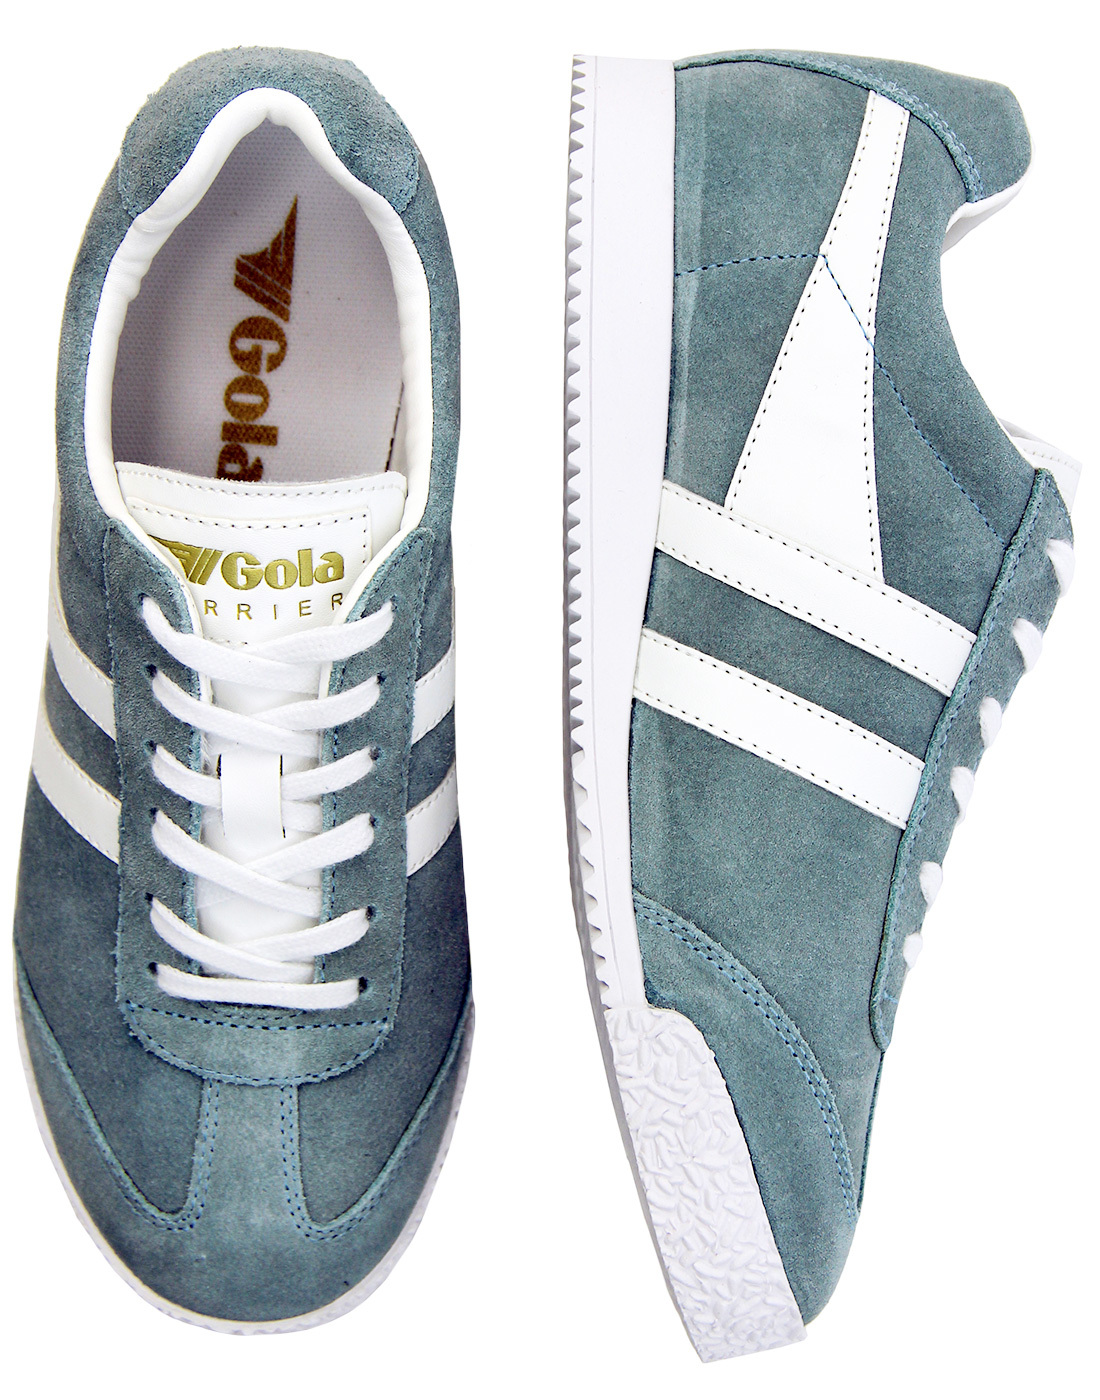 GOLA Harrier Womens Retro suede trainers IN Sky Blue & White